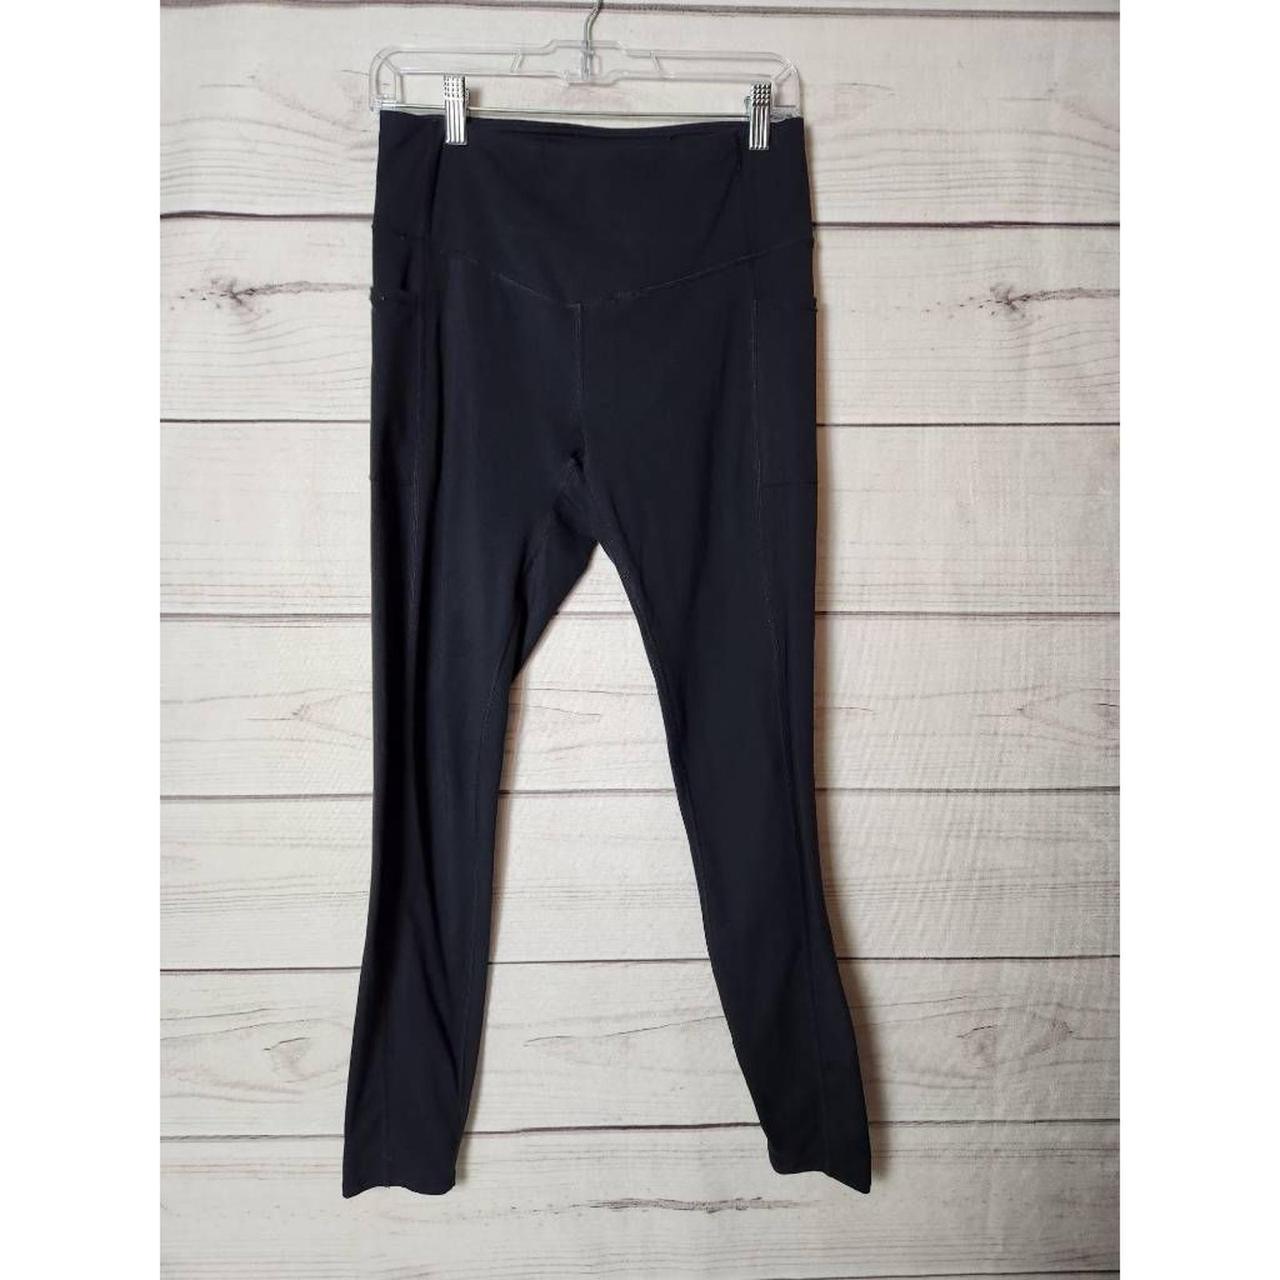 GAIAM Gray Athletic Pants for Women